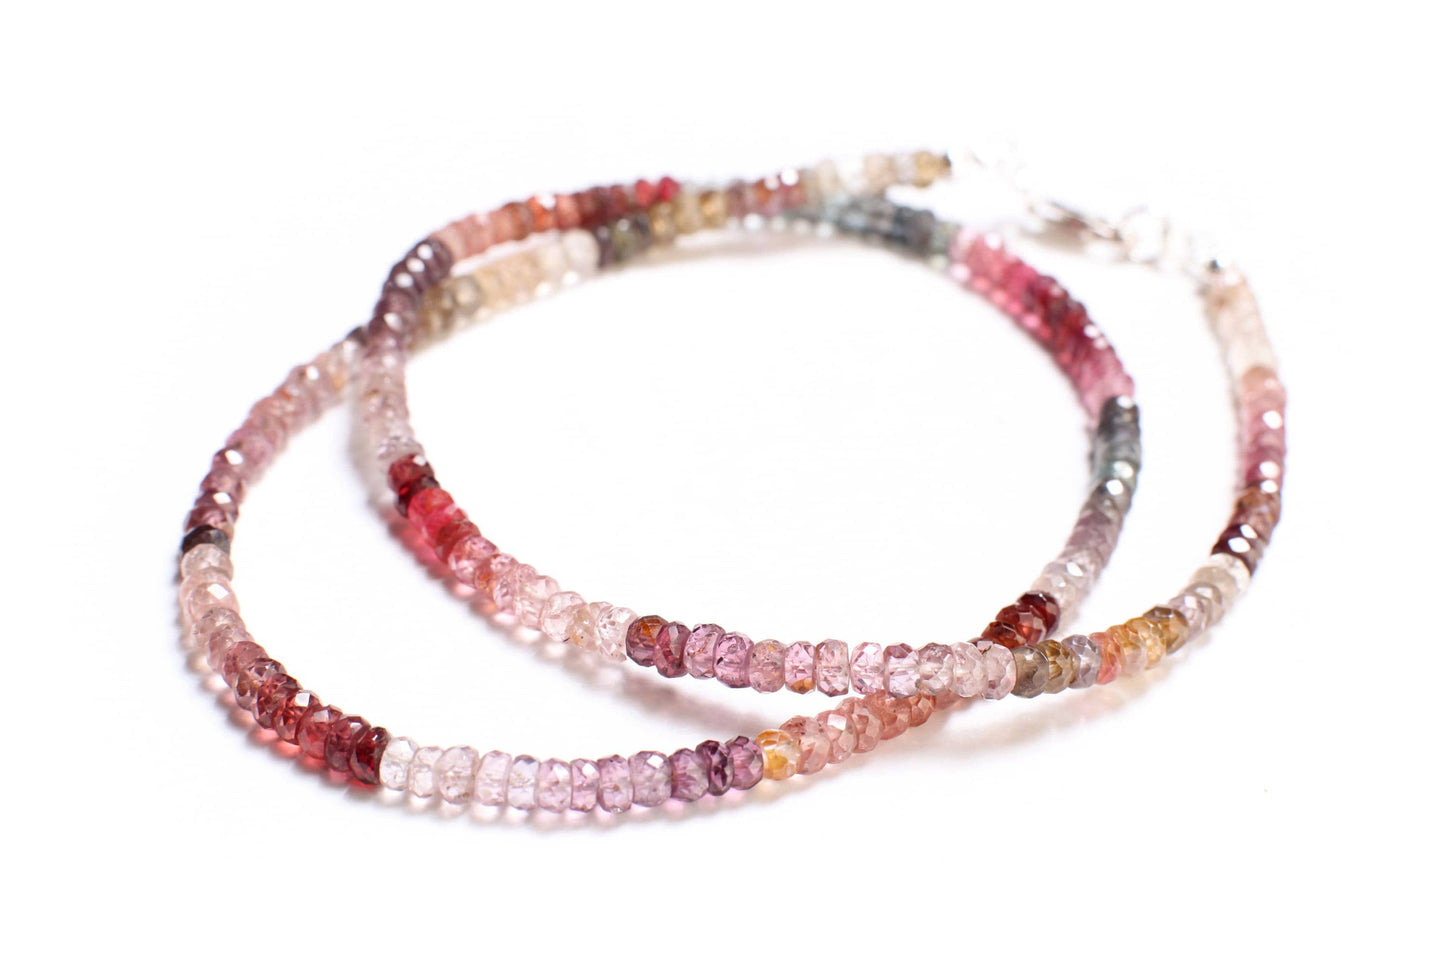 Multi Spinel Rondelle, Natural Shaded AAA 4mm Micro Cut Faceted multi Spinel Roundel with 925 Sterling Silver or Gold Filled Clasp Necklace